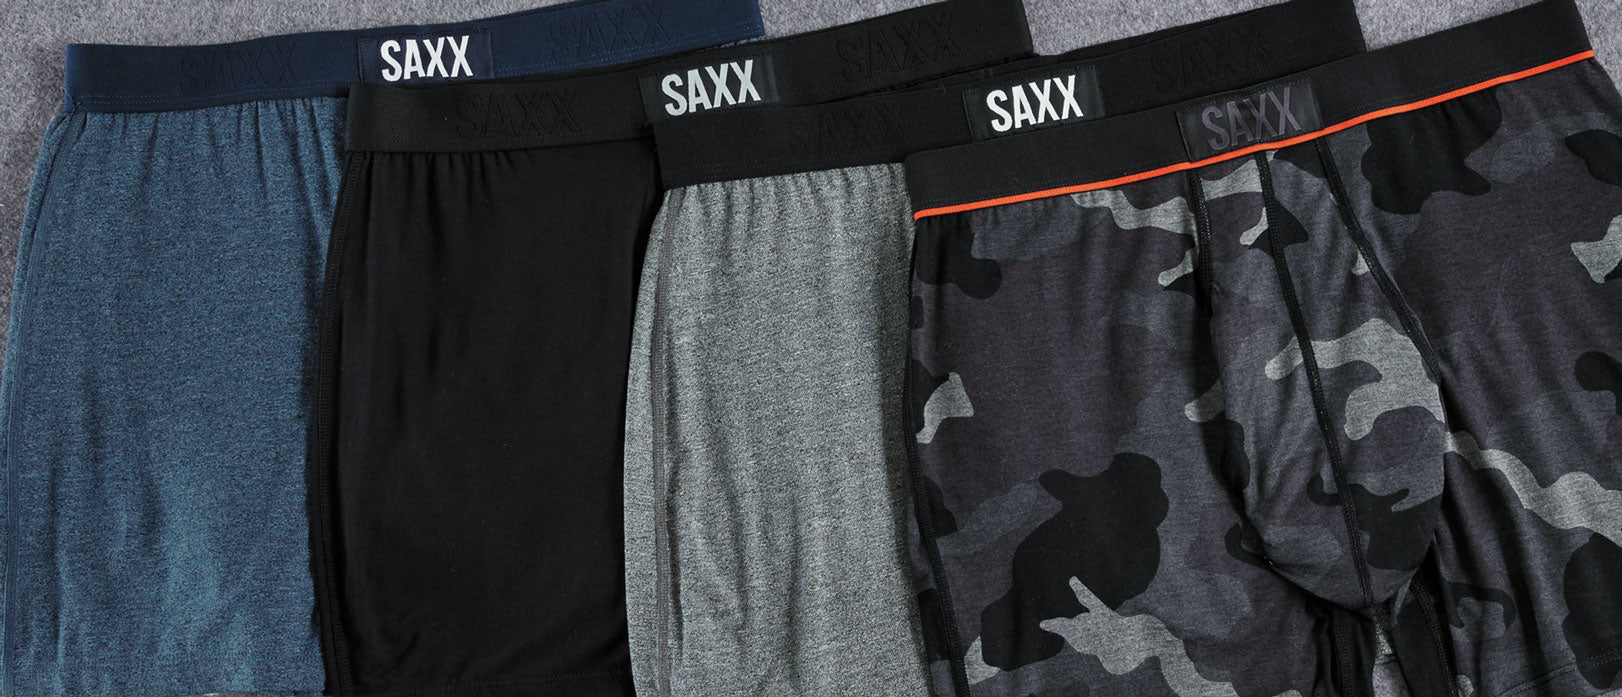 SAXX Fired Up Vibe Boxer Briefs